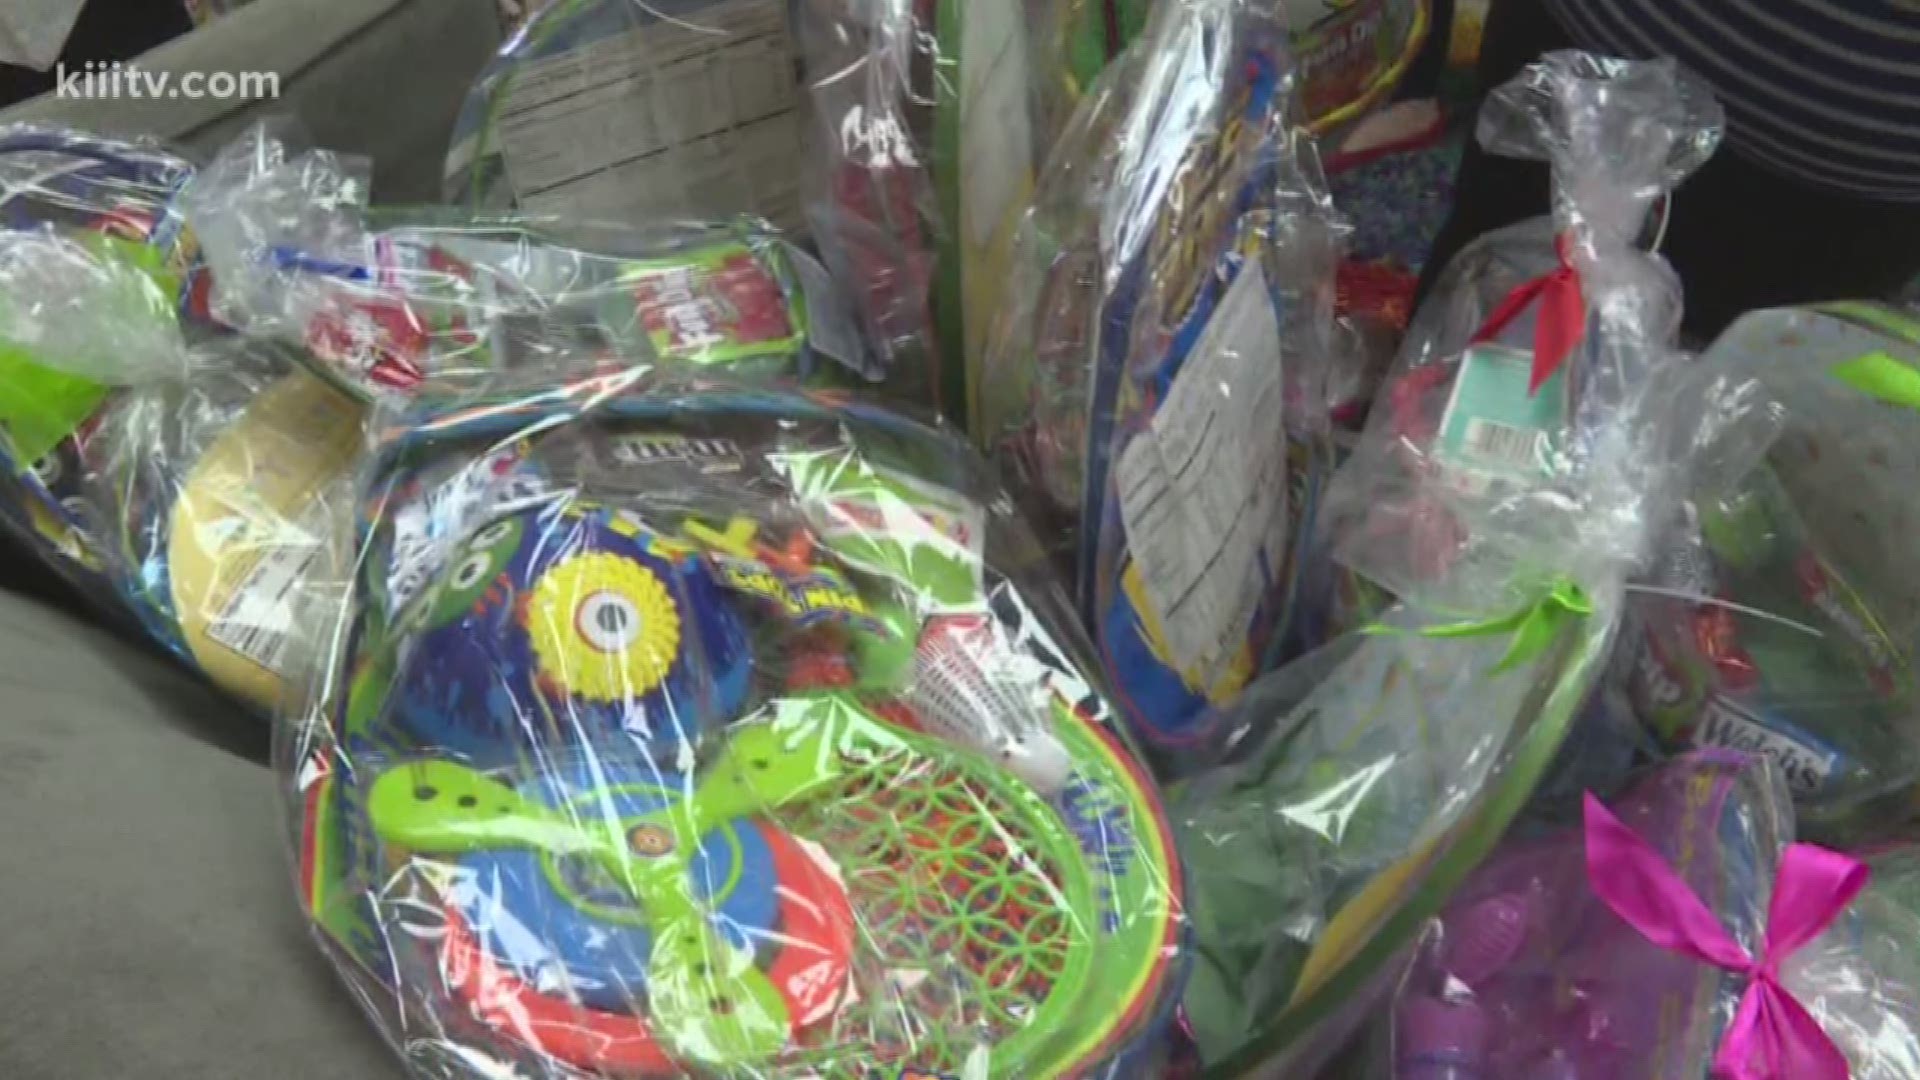 Easter baskets are a must for many kids on the holiday, and that's why one organization is making sure hundreds of kids in need have one to celebrate.